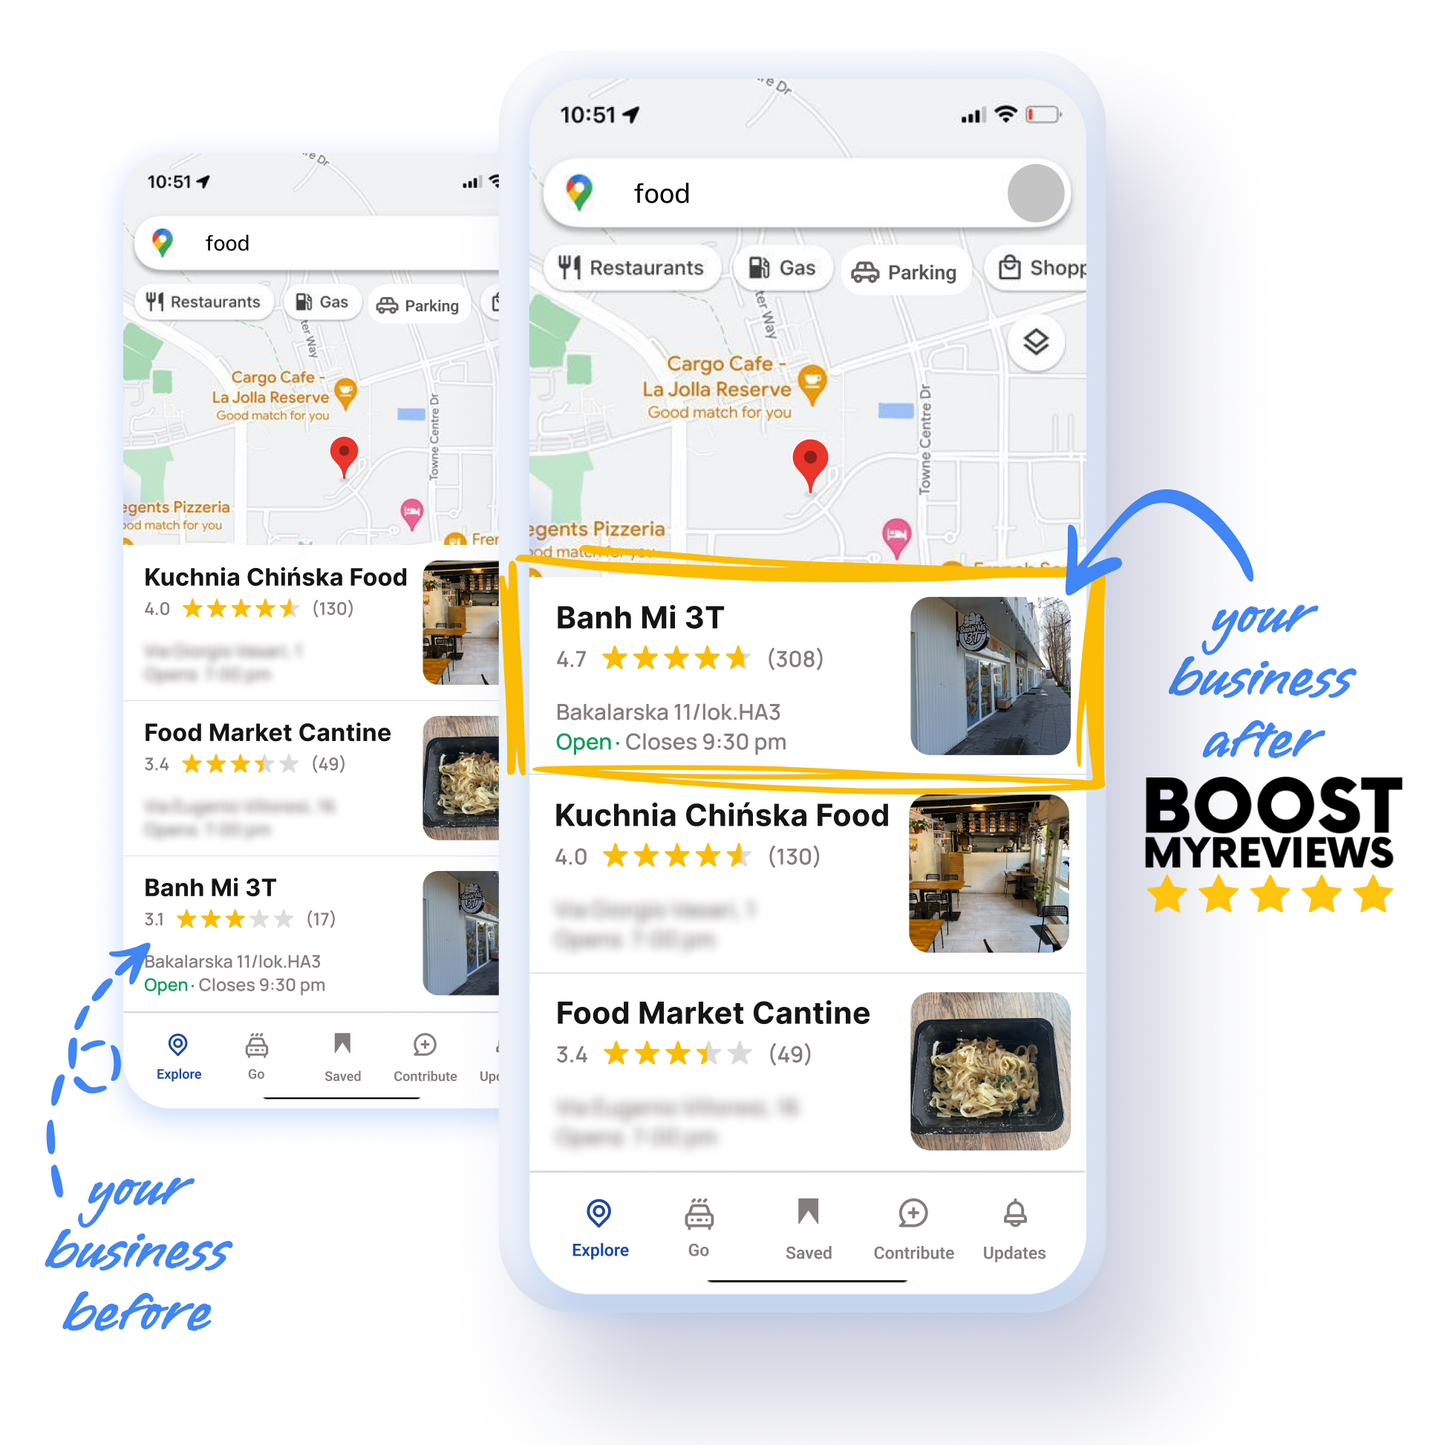 Boost My Google Reviews™- UNLIMITED Reviews per Card